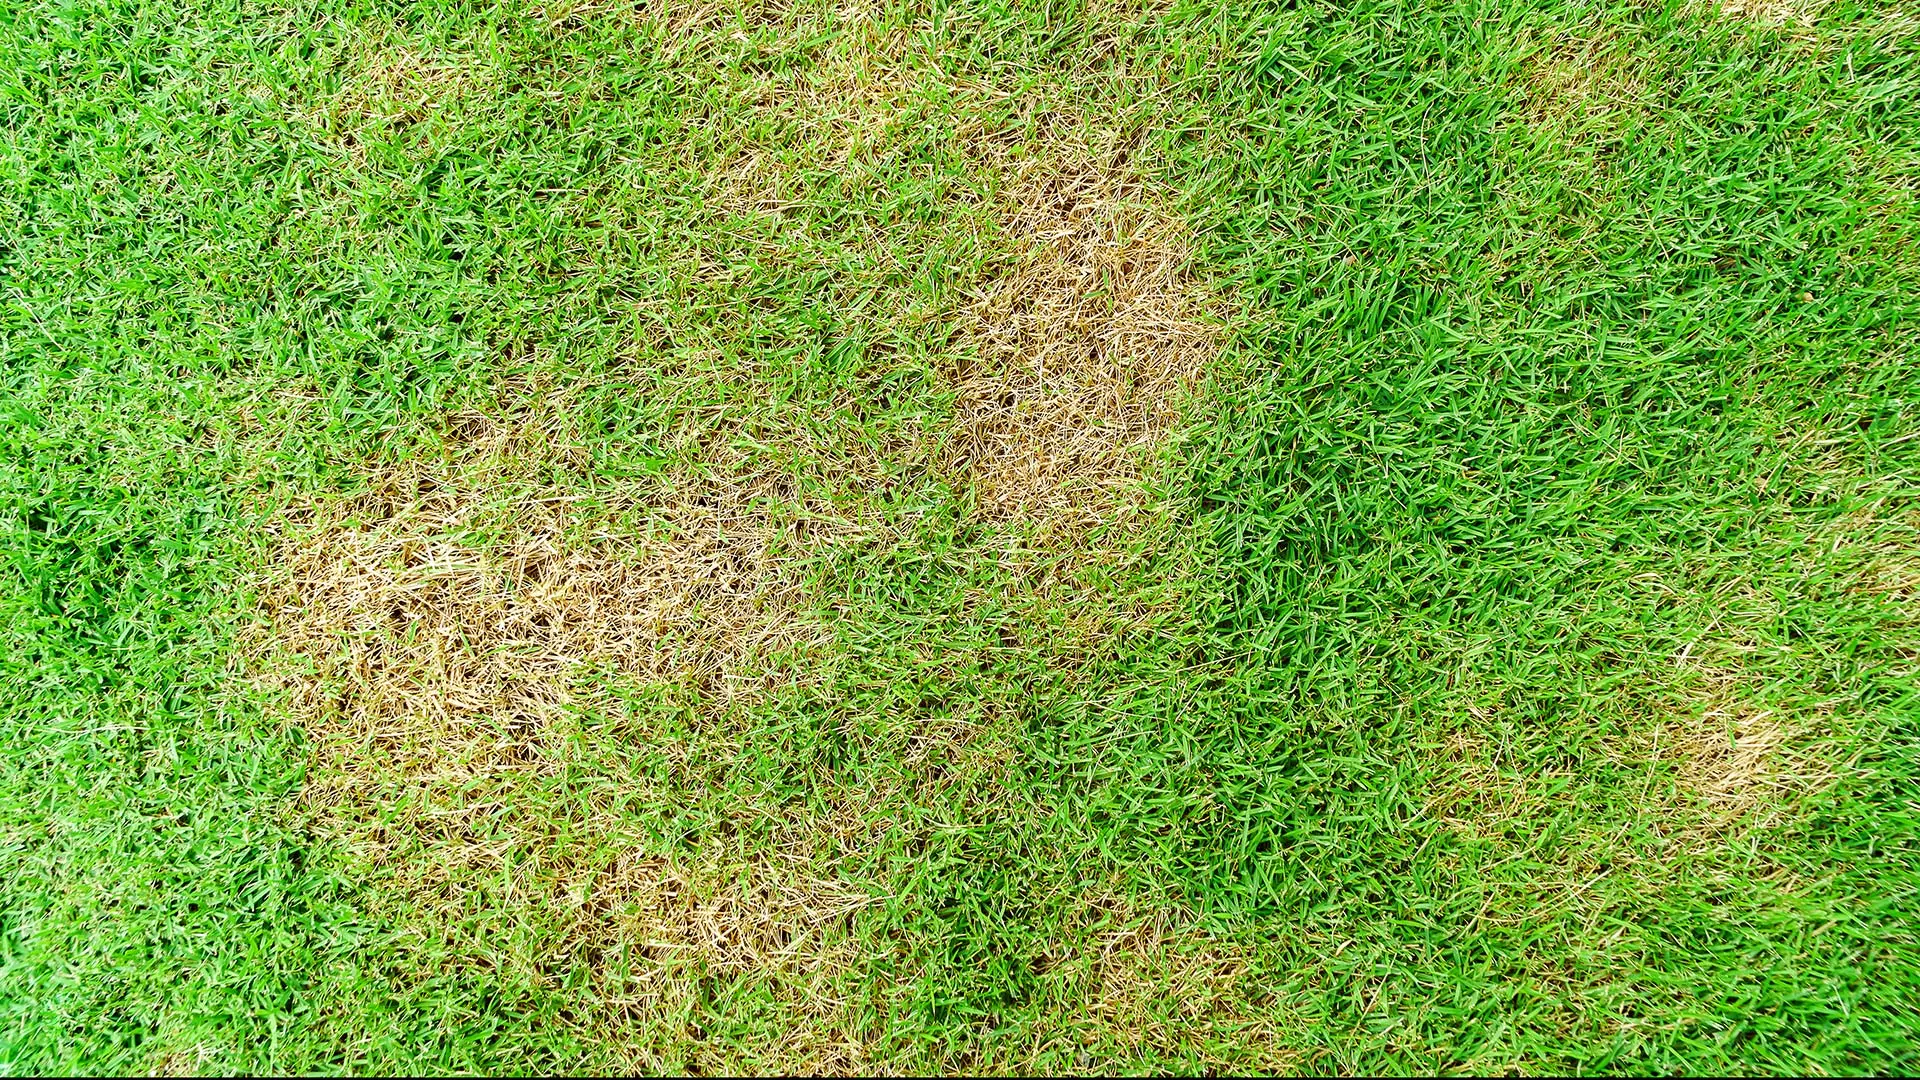 Does My Lawn Have Brown Patch Disease or Does It Just Need Water?